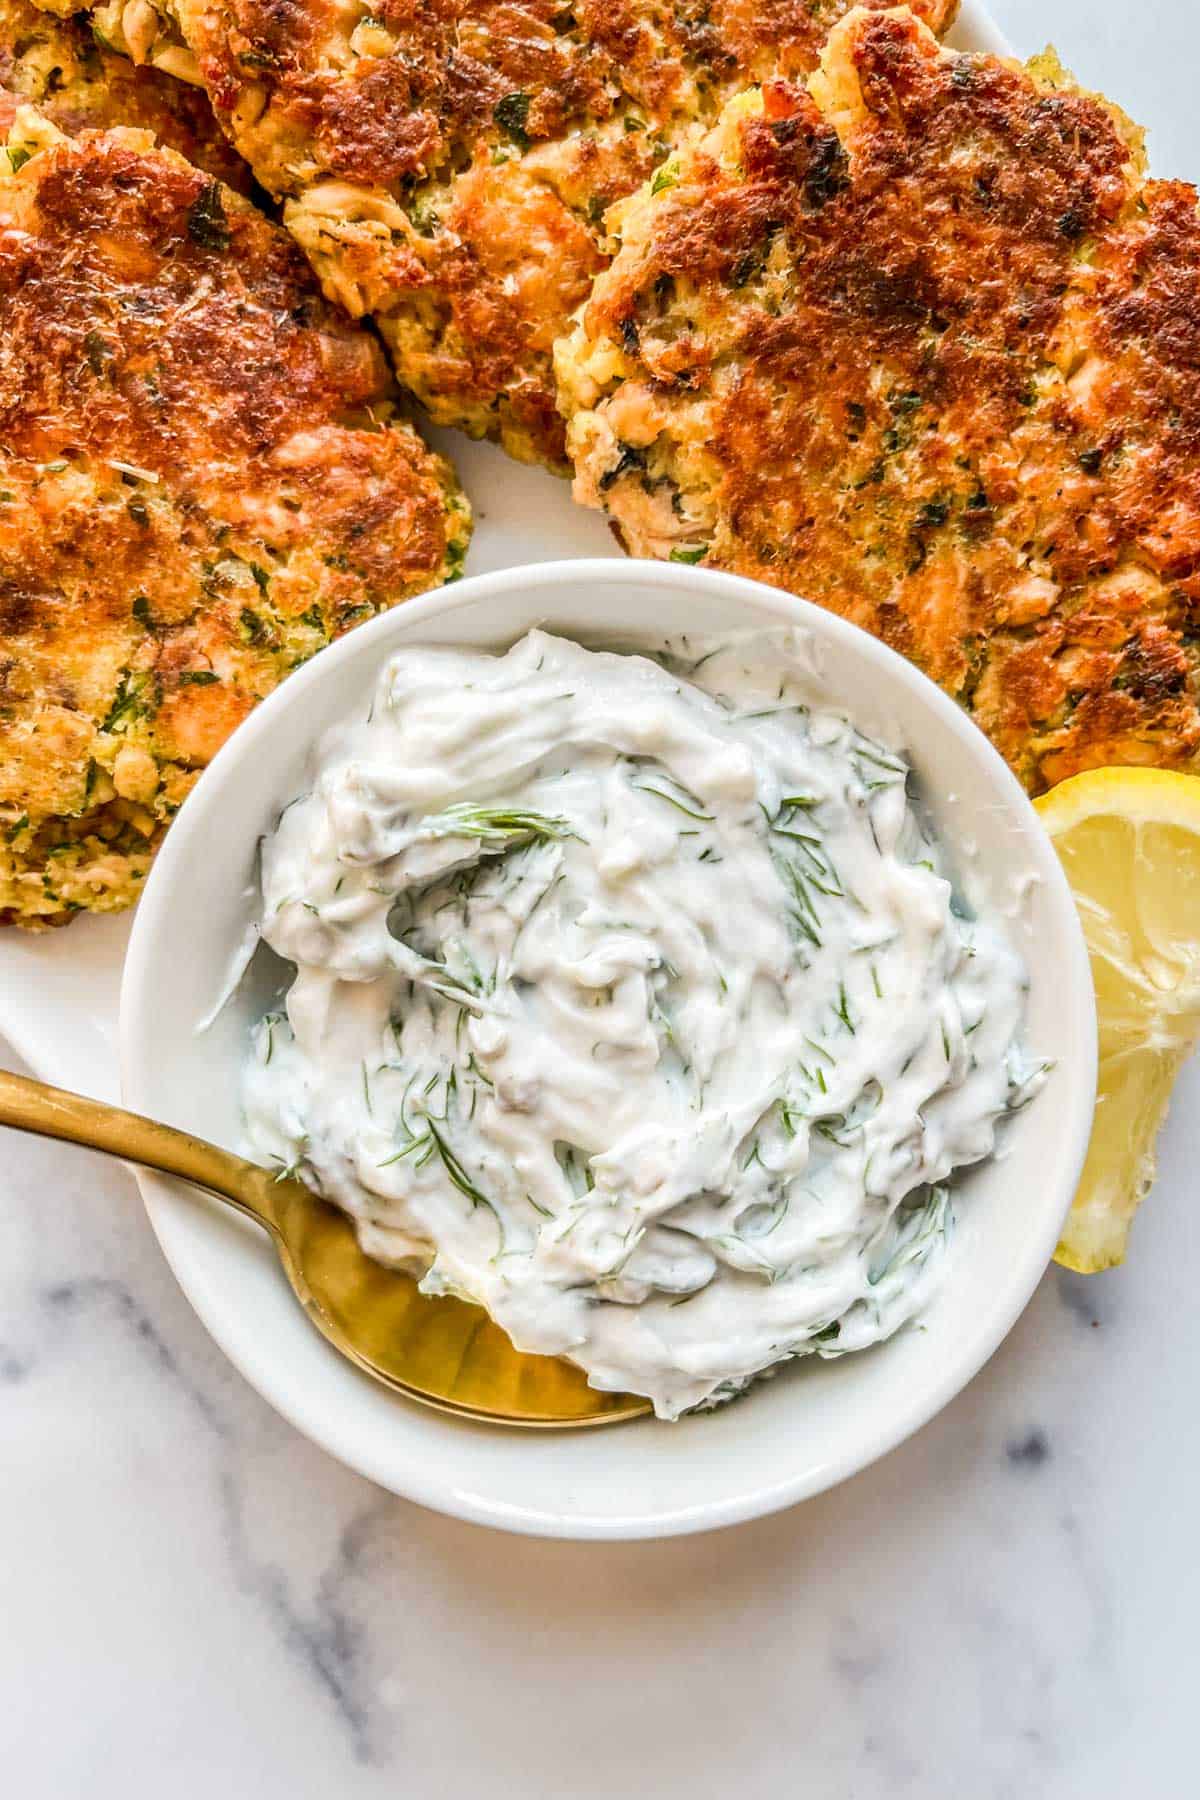 Dill sauce in a small white bowl next to salmon patties.